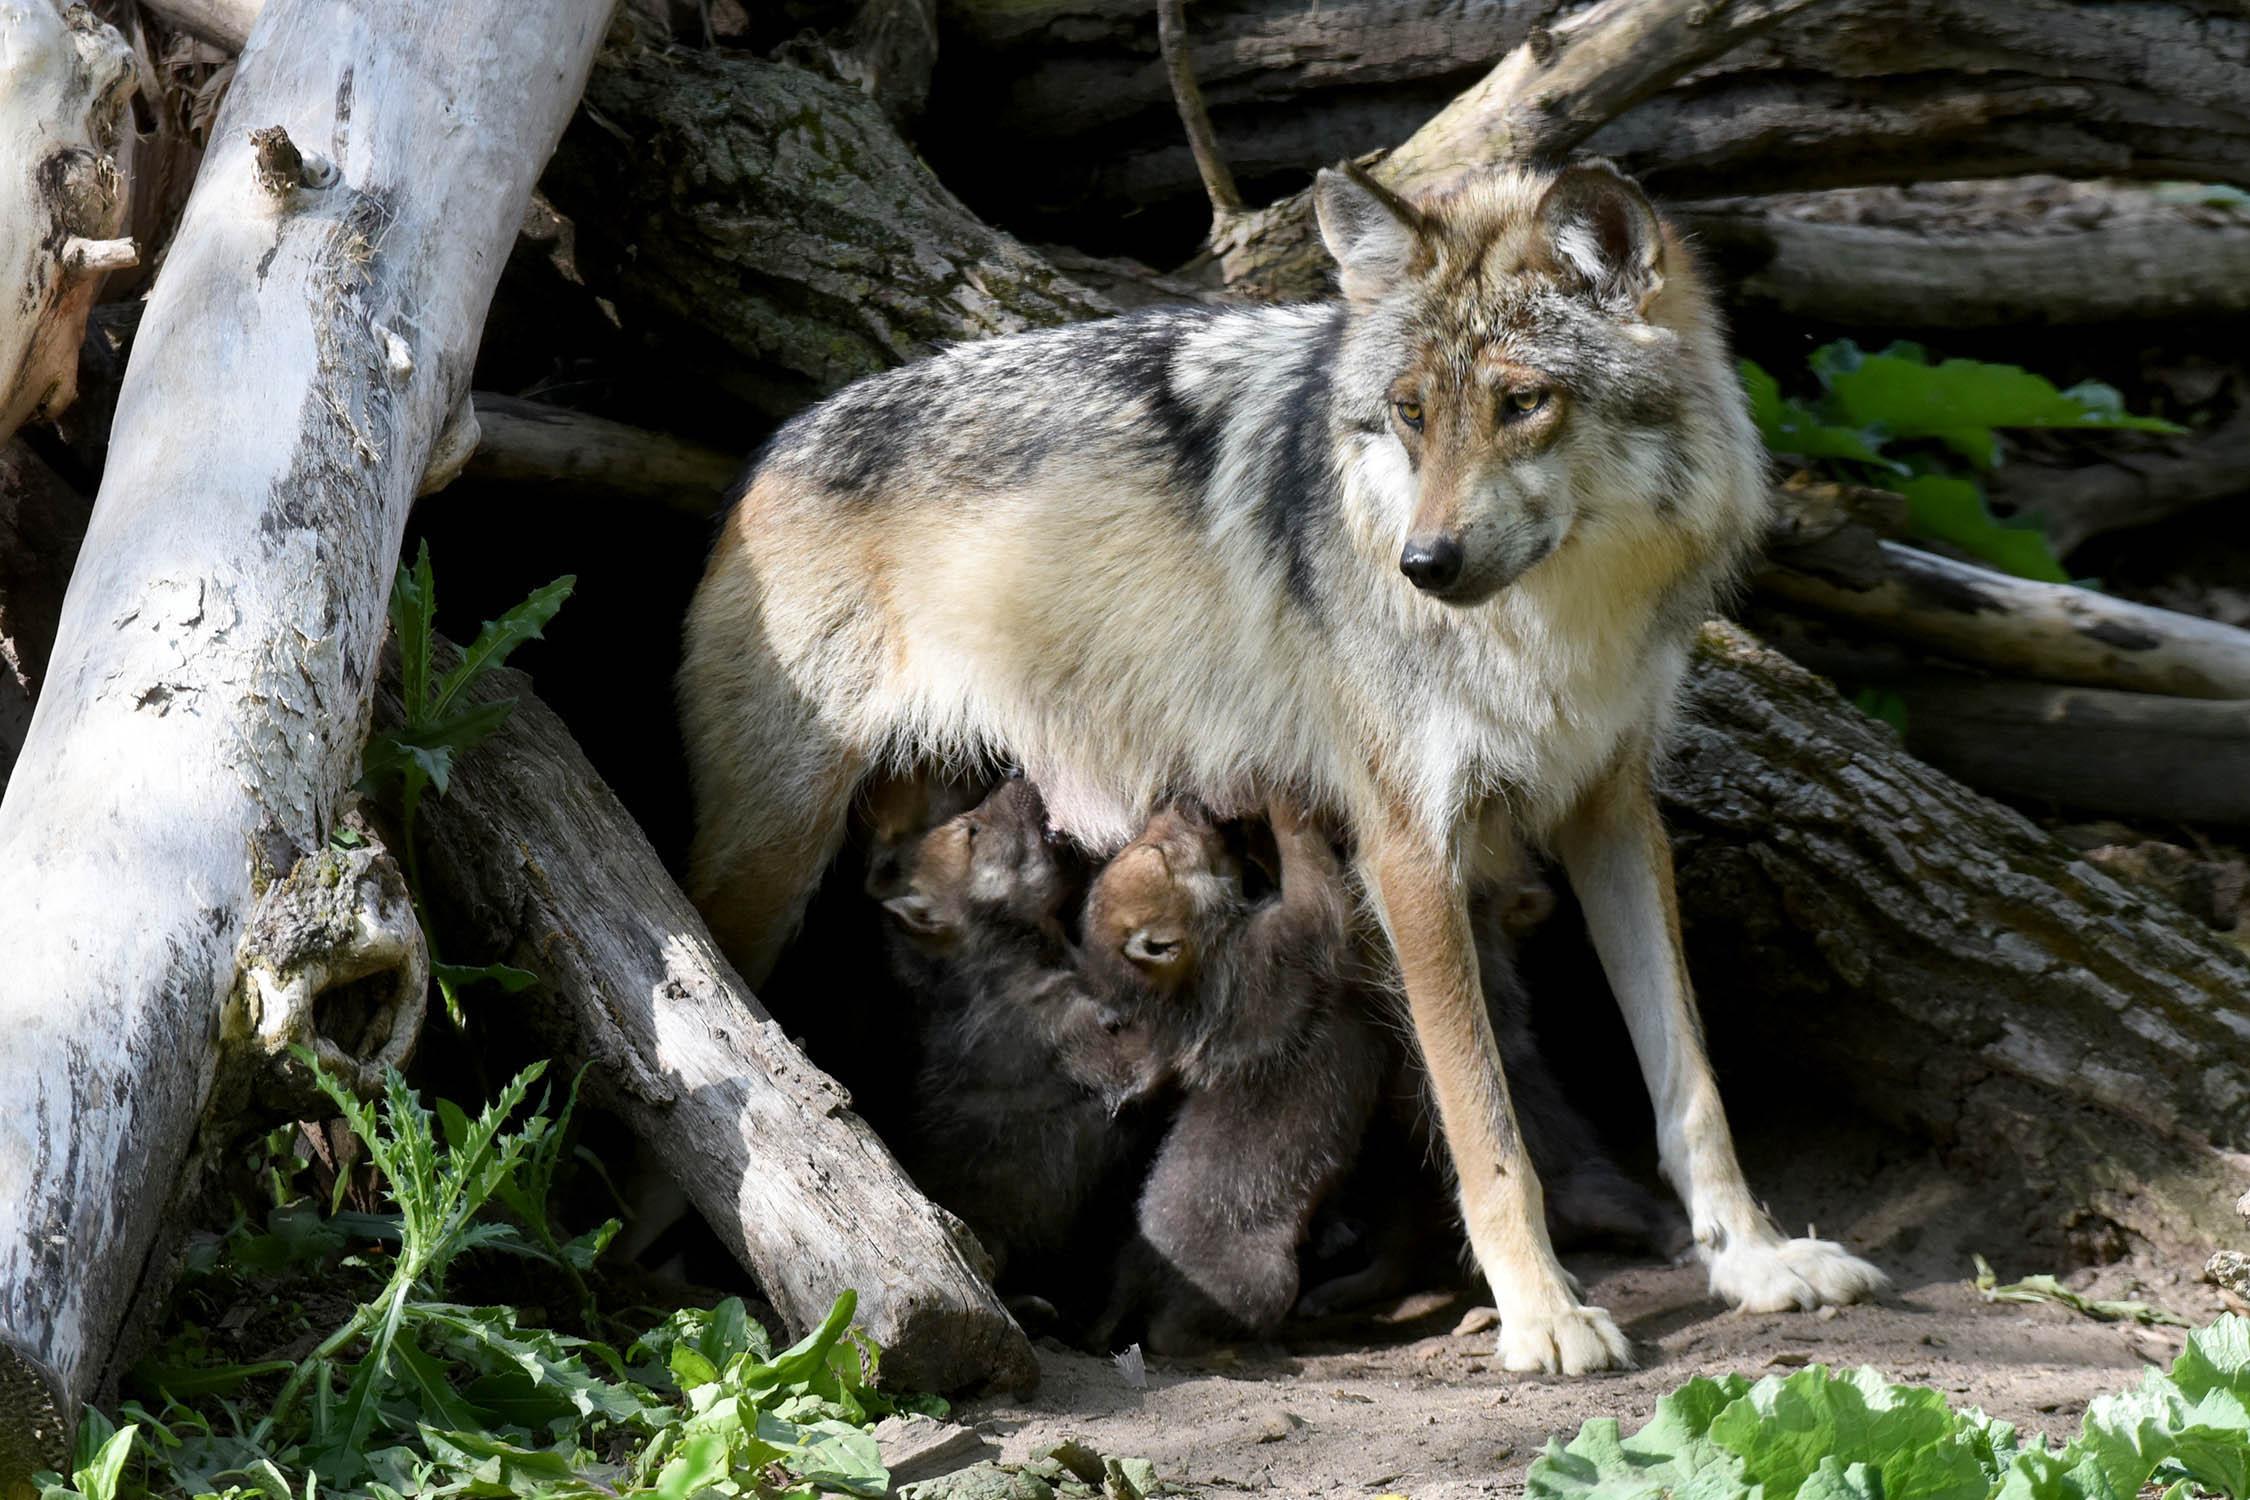 Mexican gray wolf Zana gave birth to five pups in April. Two of the pups were transferred from the zoo and placed in the den of the San Mateo wolf pack in New Mexico. (Courtesy Chicago Zoological Society)